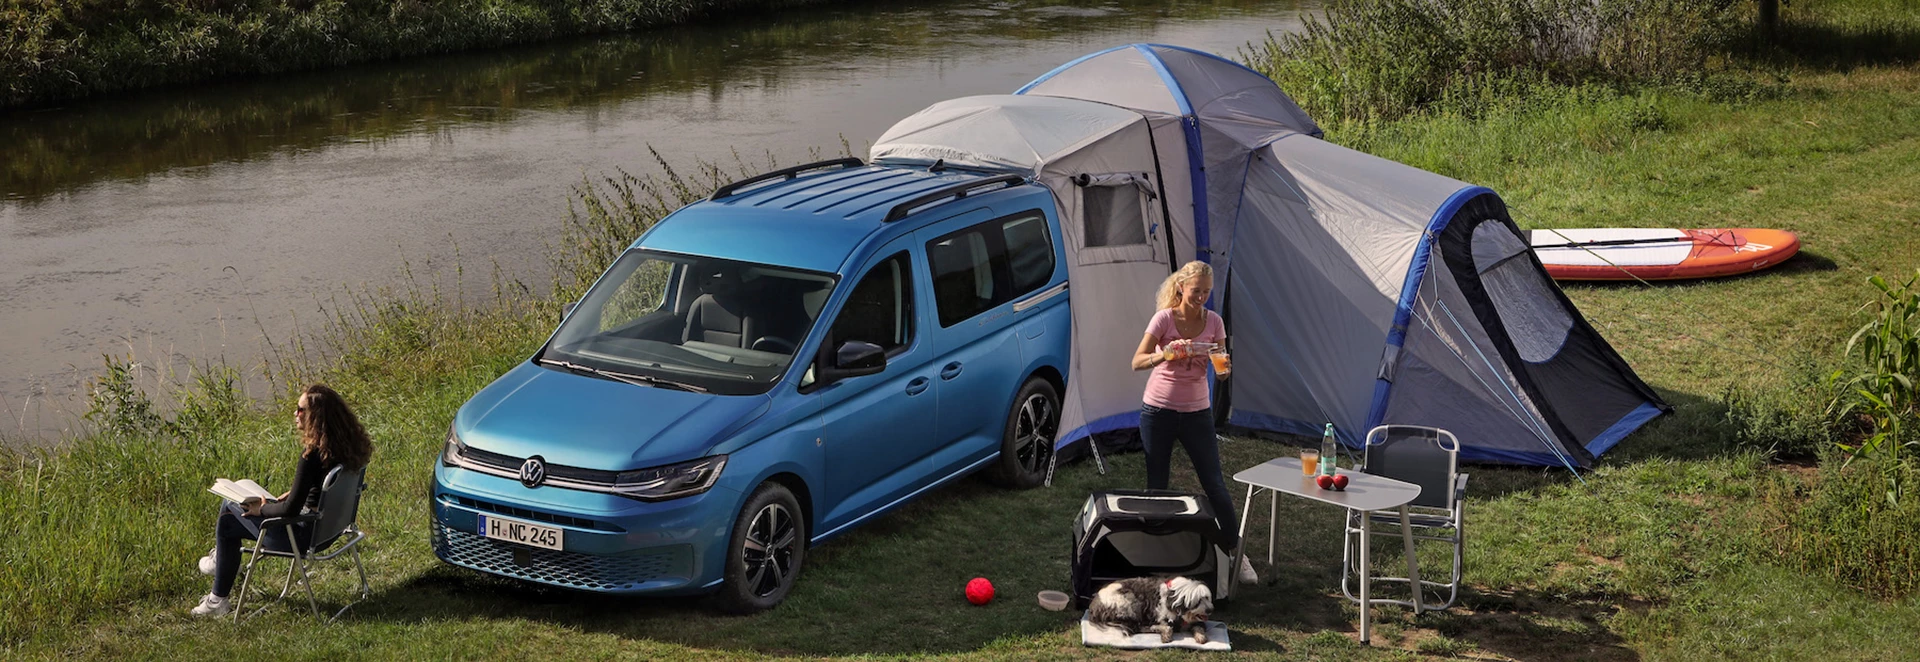 Volkswagen Caddy California now available to order 